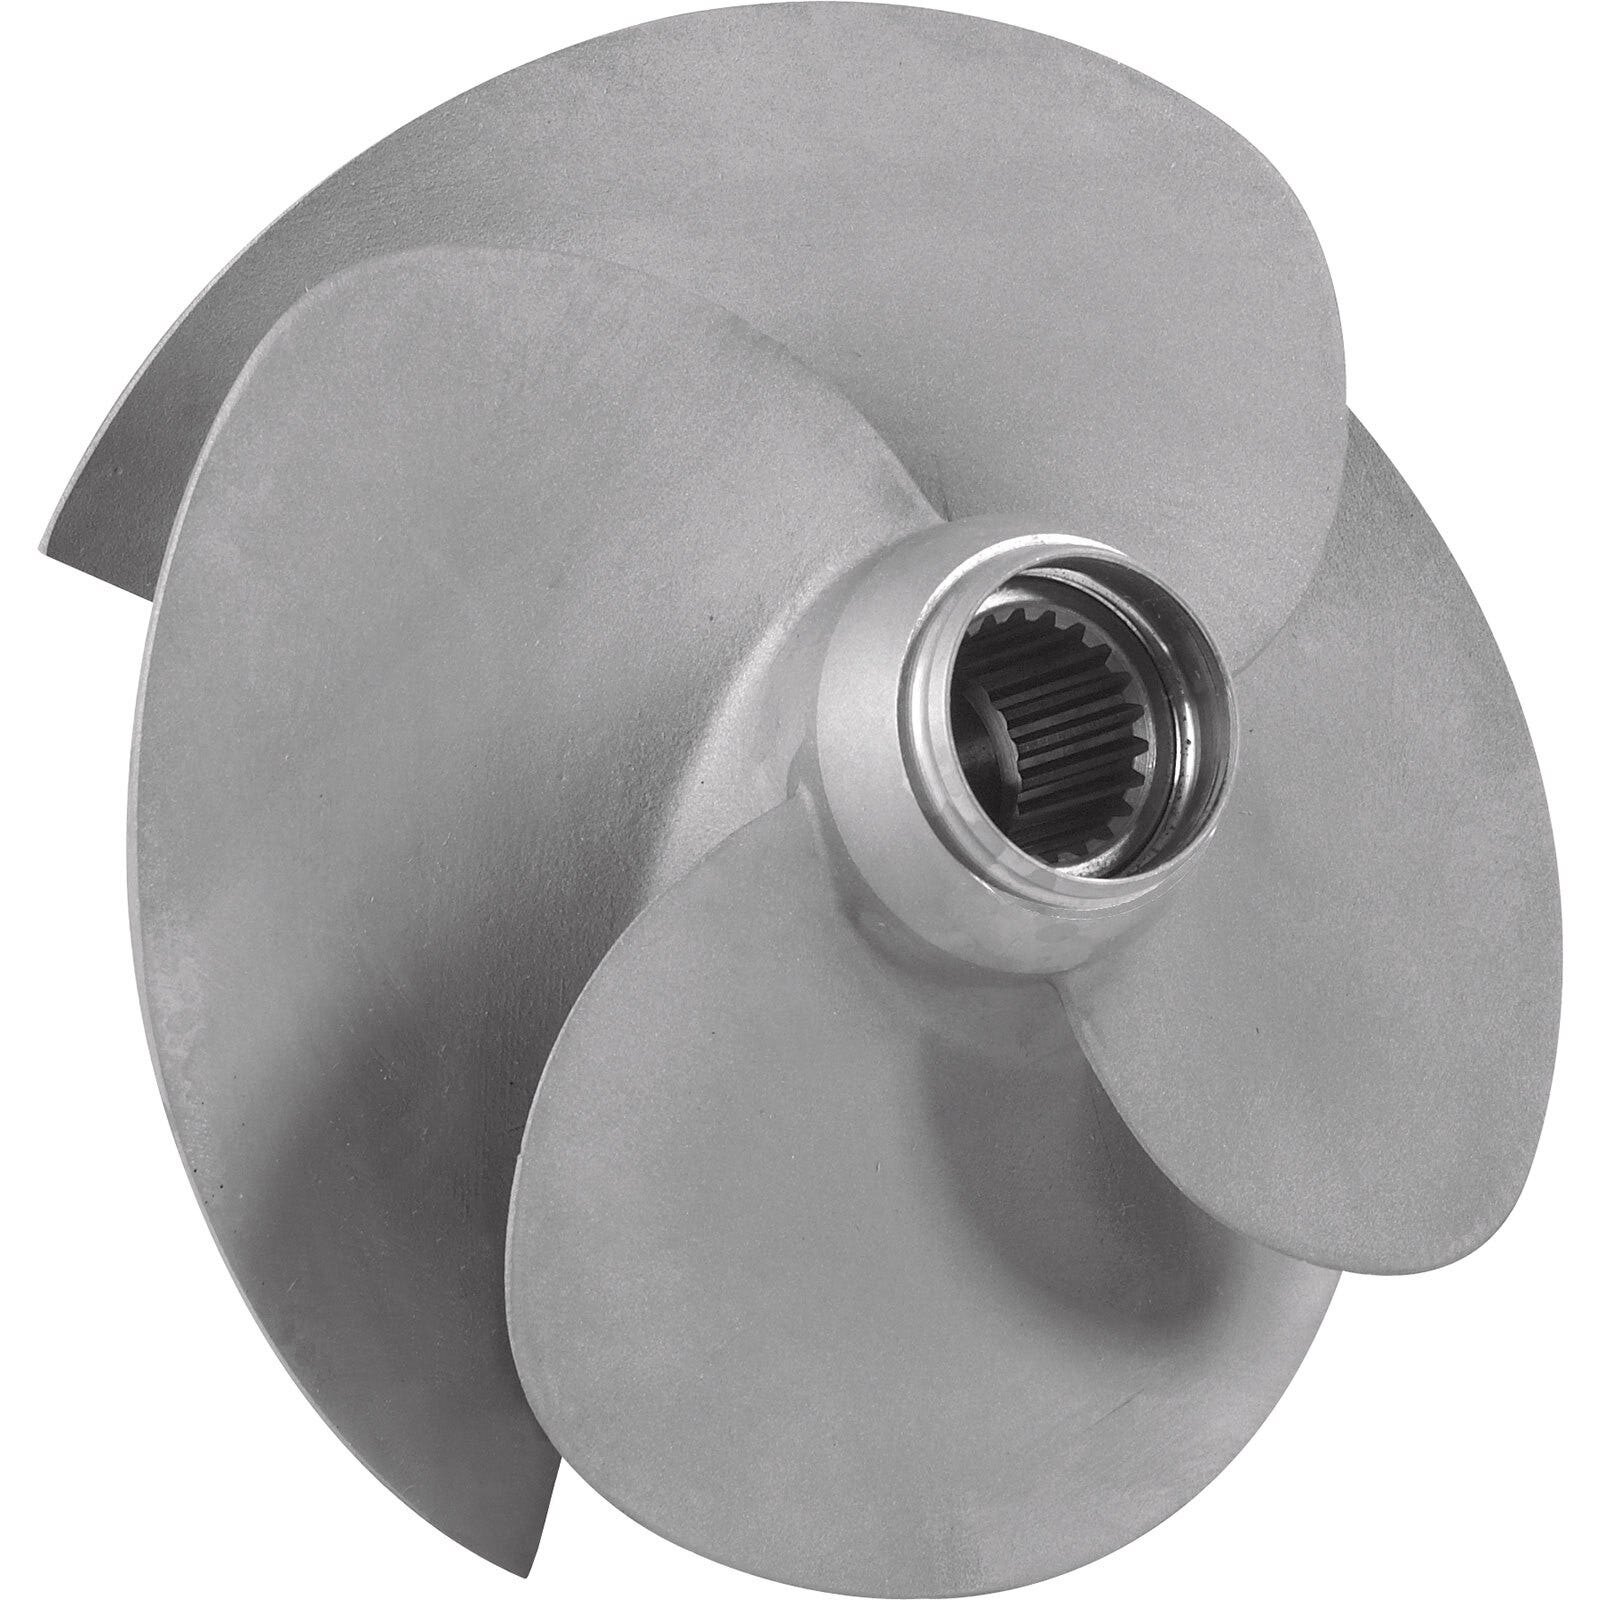 GTX 155 and WAKE 155 (2018 2019) Impeller